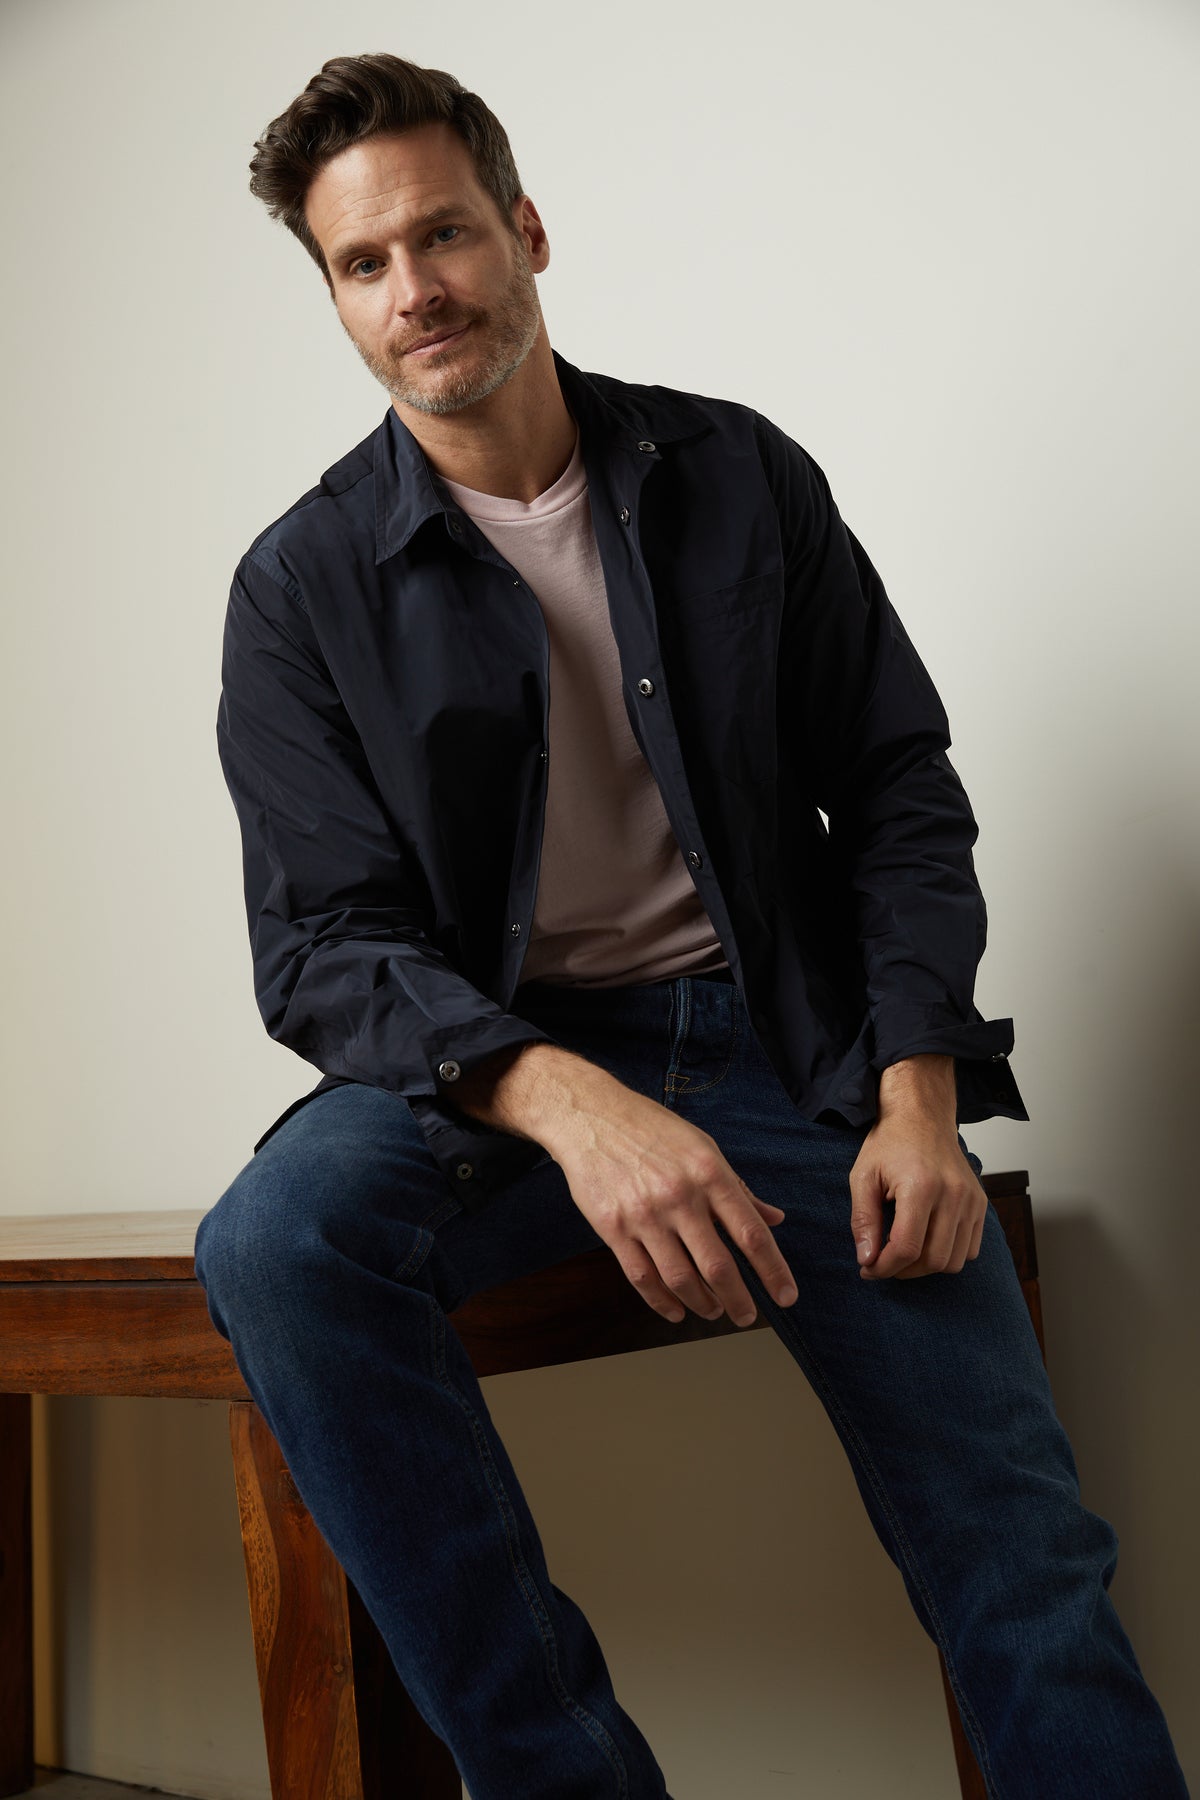   A man sitting on a wooden bench wearing Velvet by Graham & Spencer jeans and a shirt. 